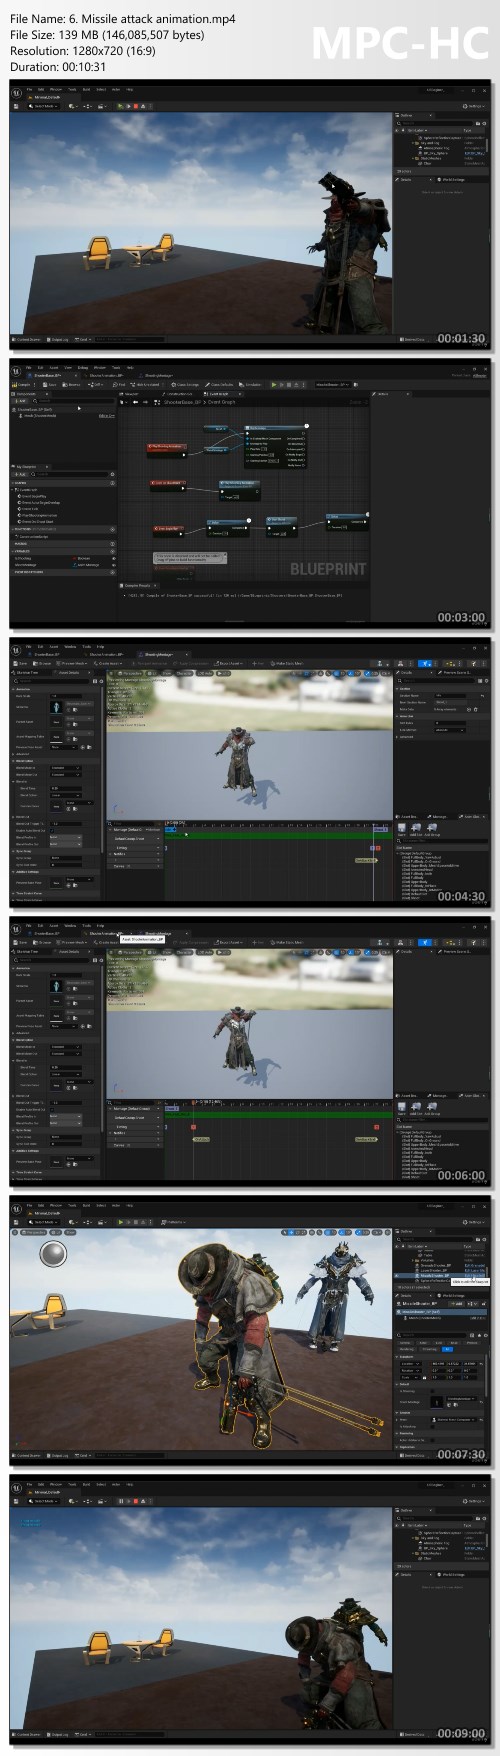 Unreal Engine 5(UE5): Develop High Quality Game with UE5 by Tyler DeLange